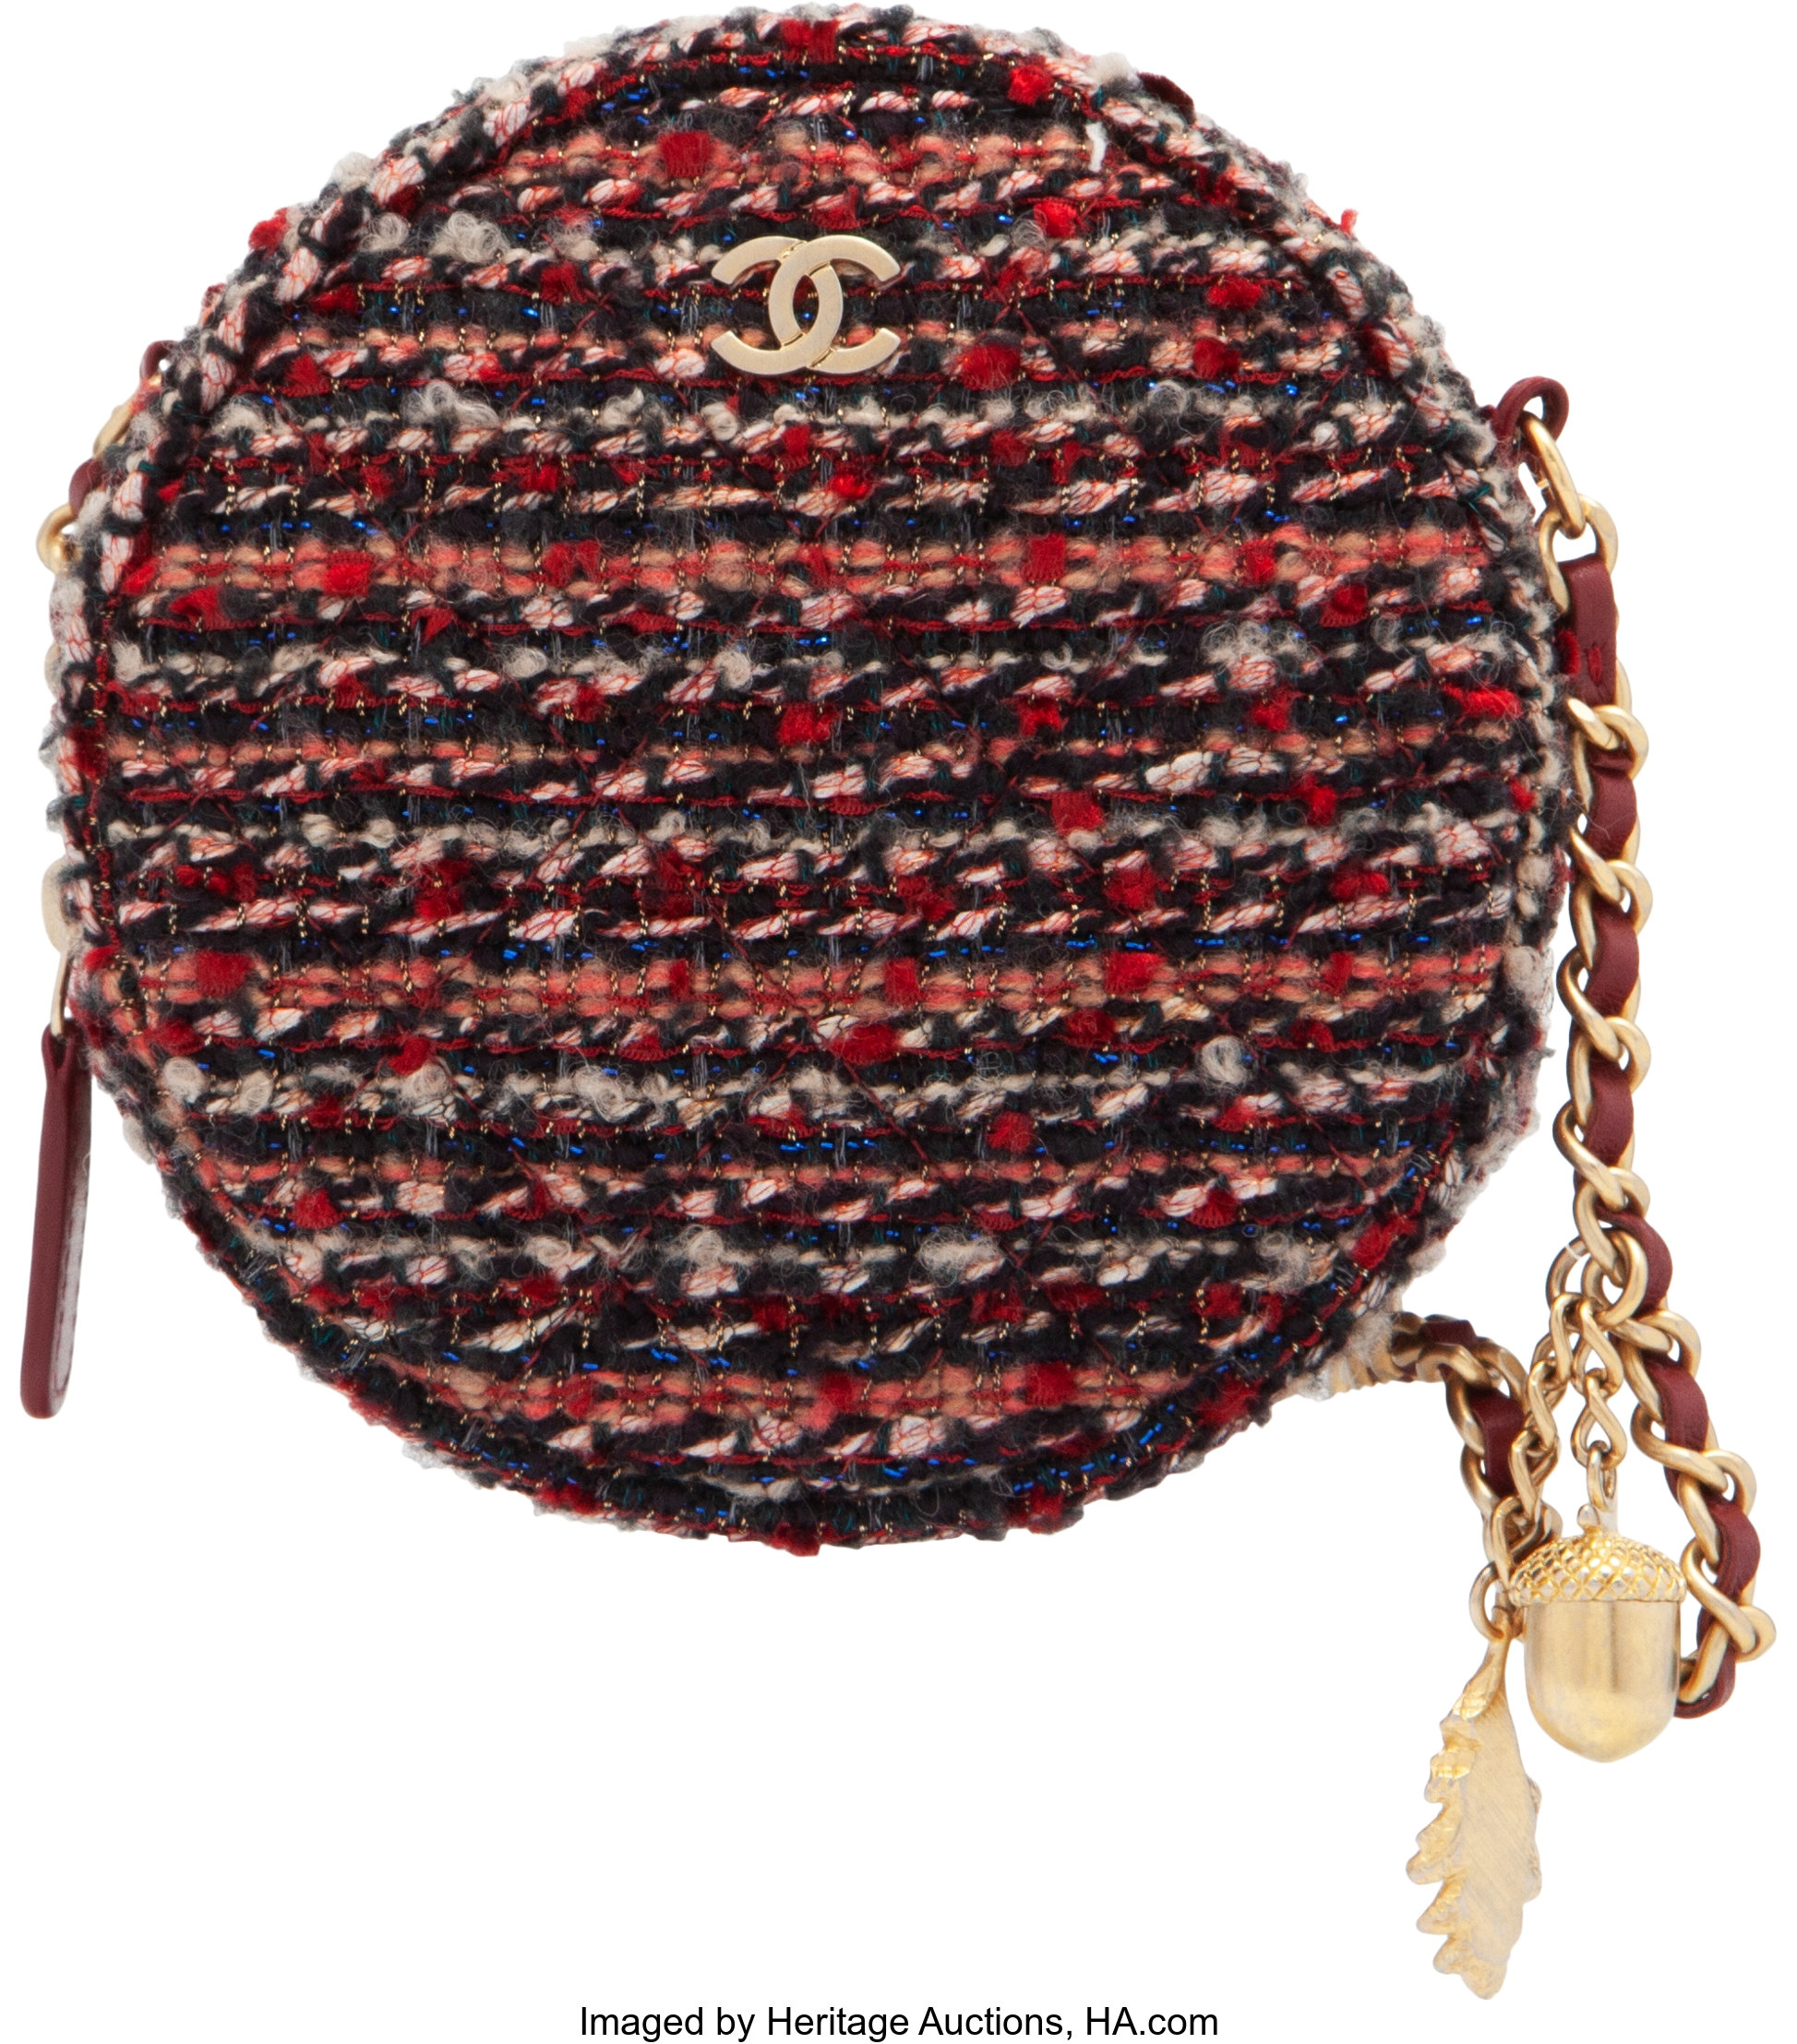 Chanel Red Tweed Round Crossbody Bag with Aged Gold Hardware., Lot #15093